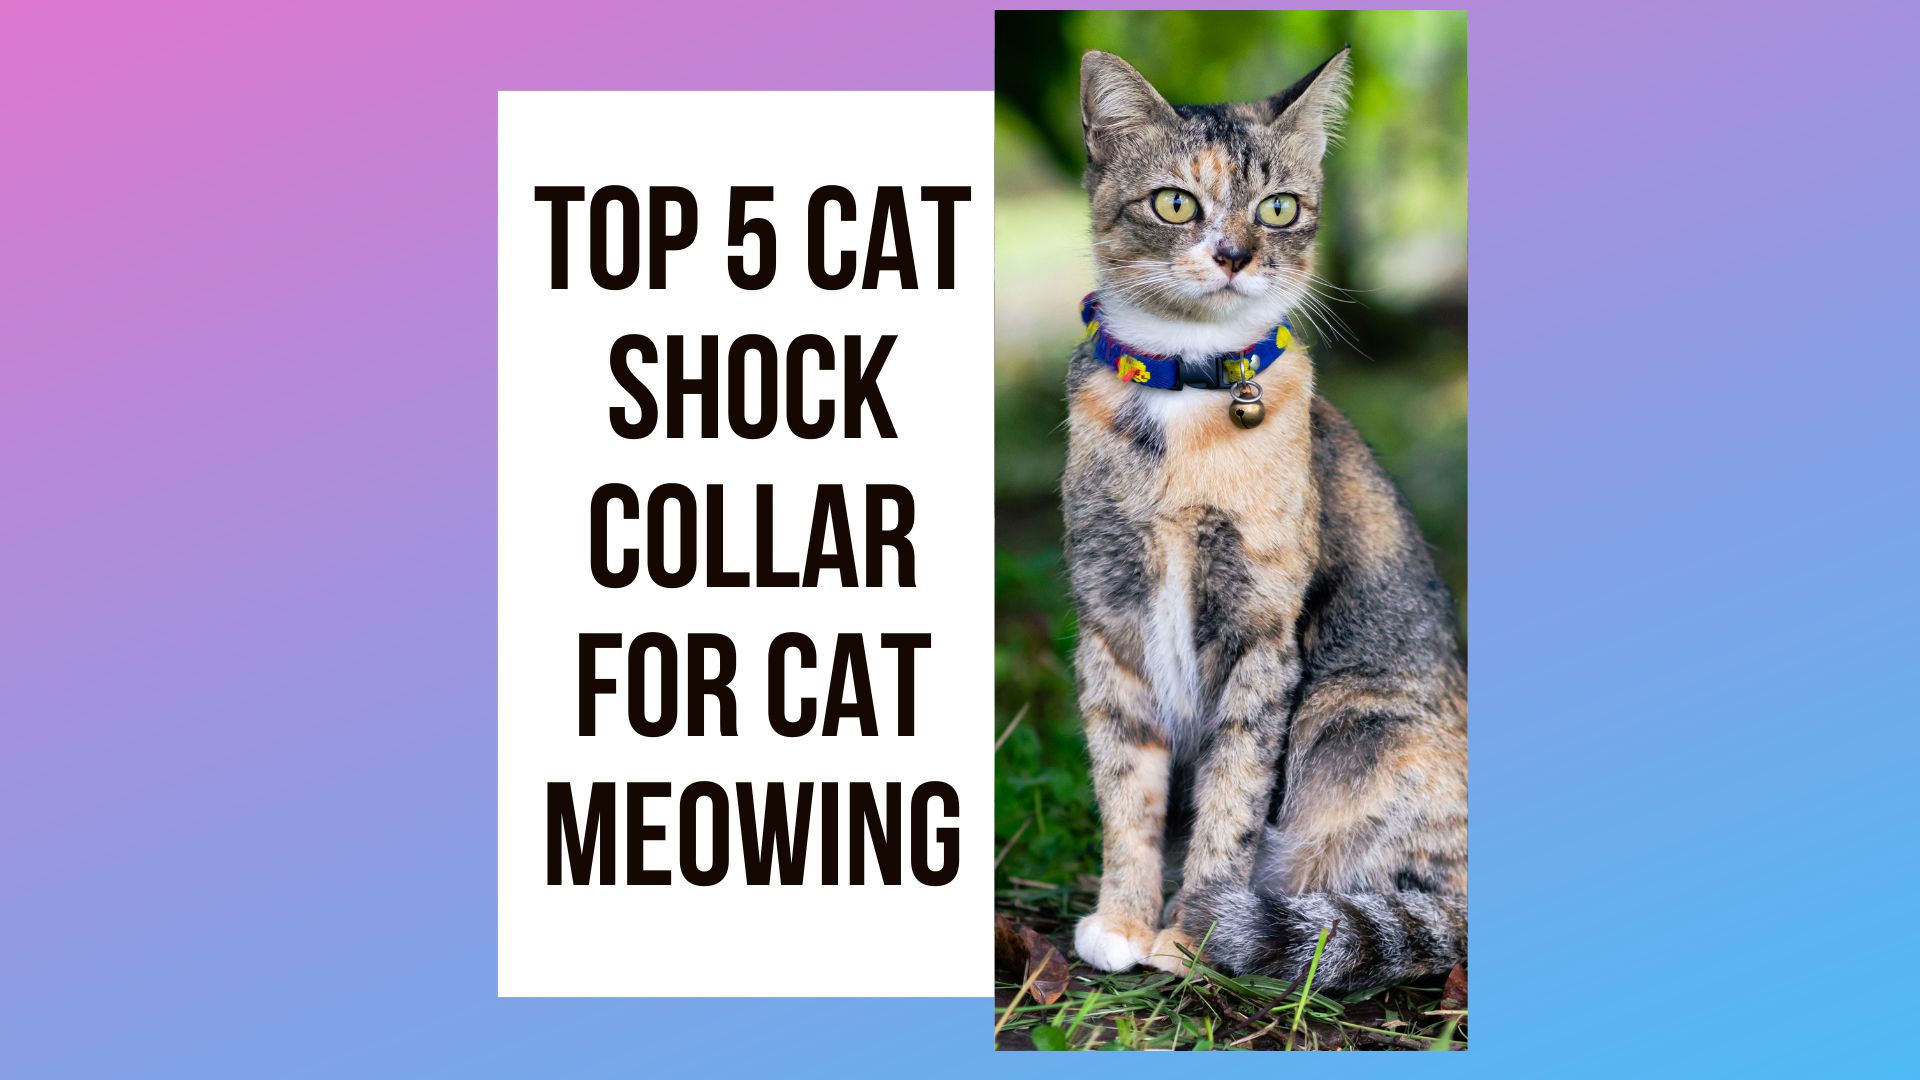 Cat Shock Collar For Cat Meowing